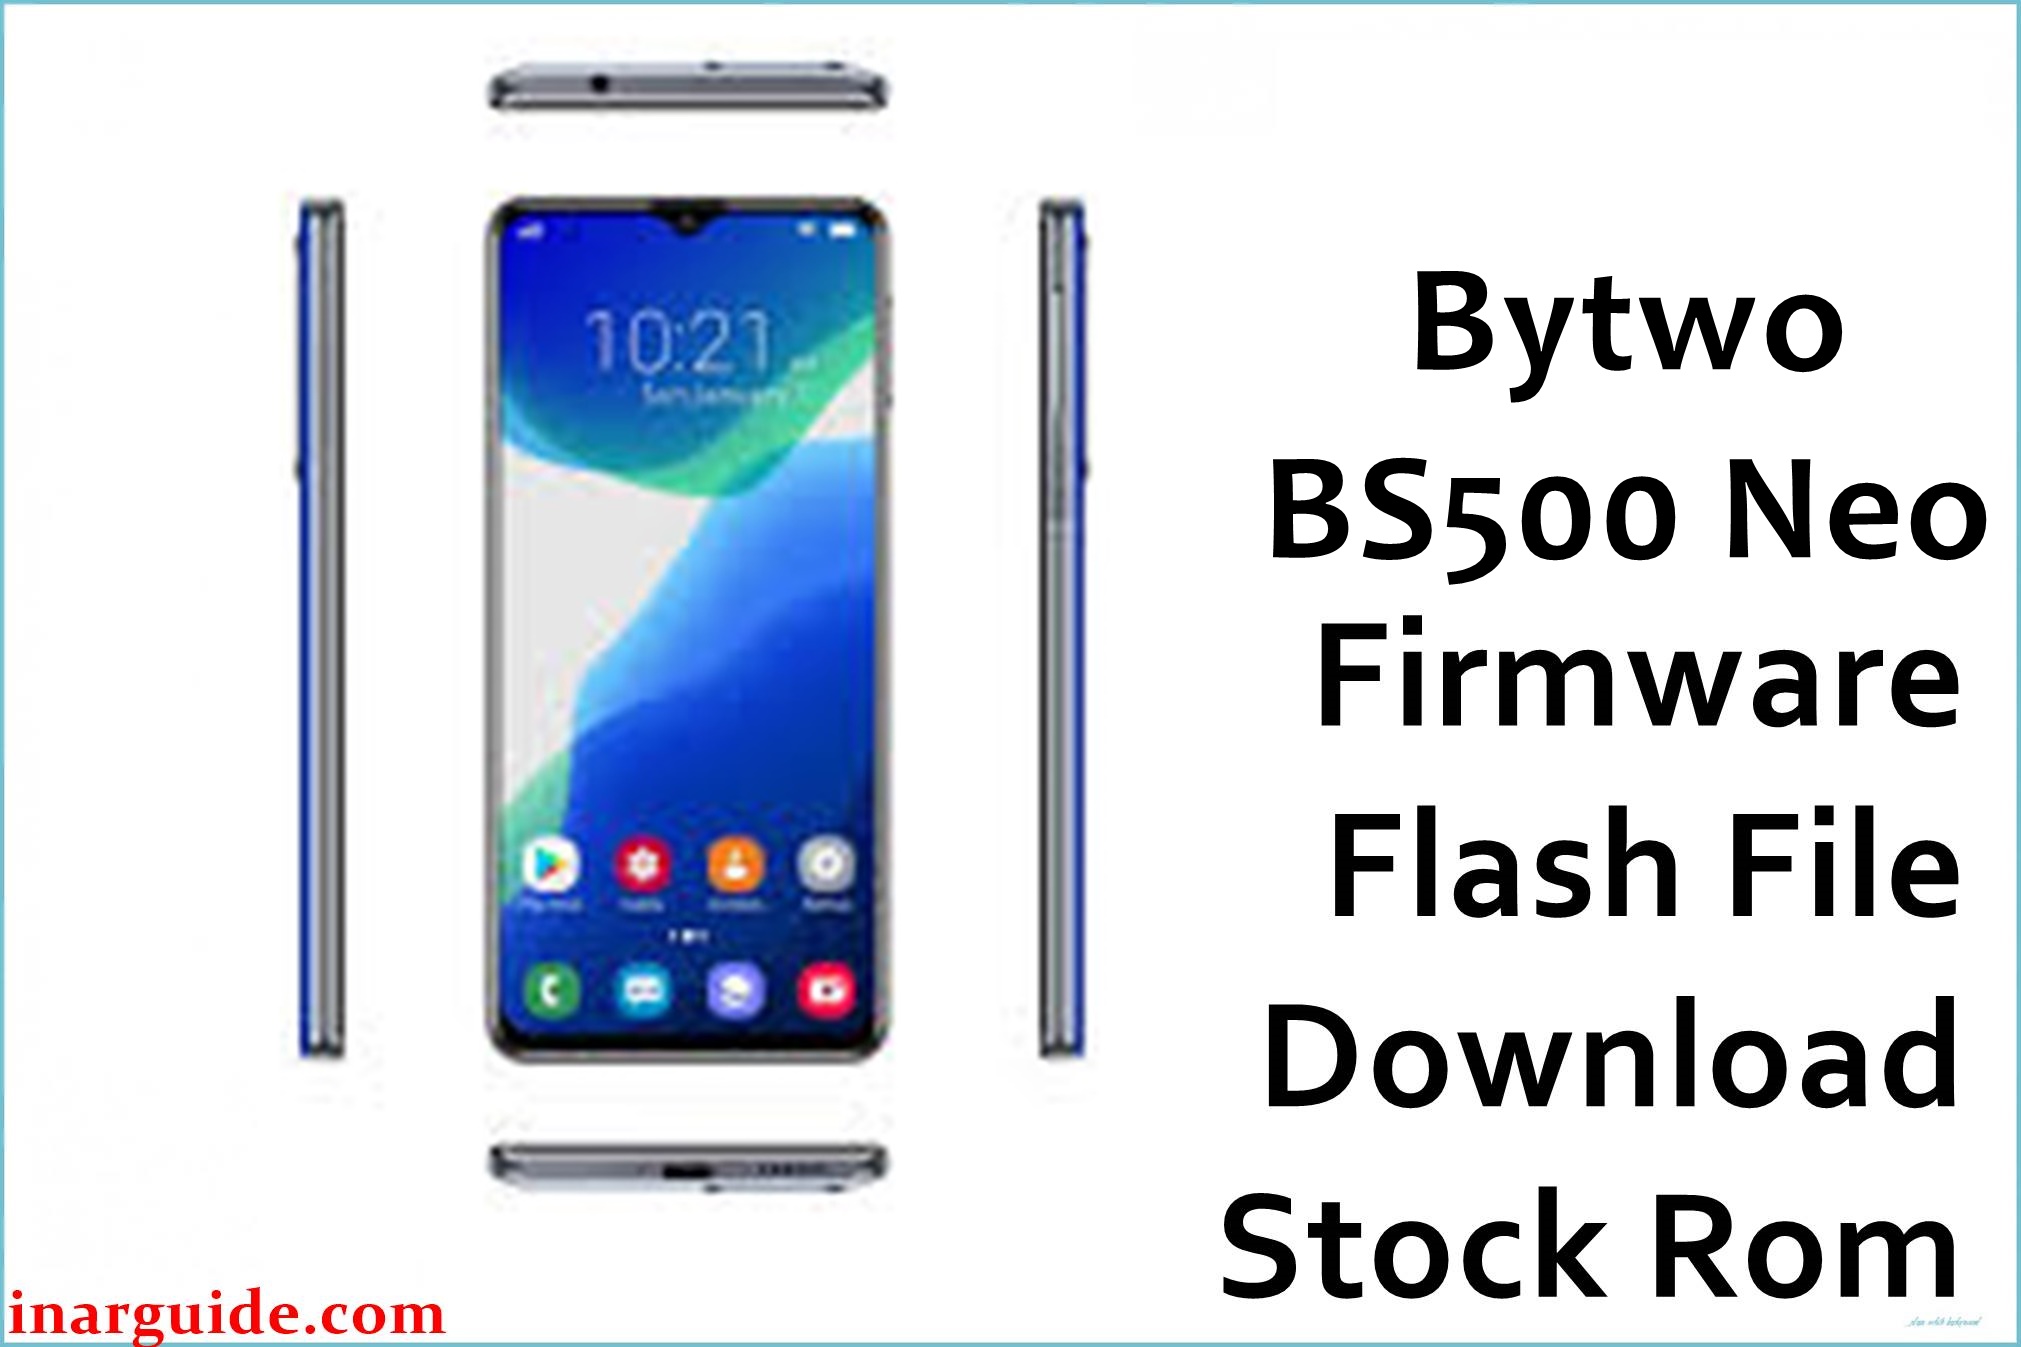 Bytwo BS500 Neo